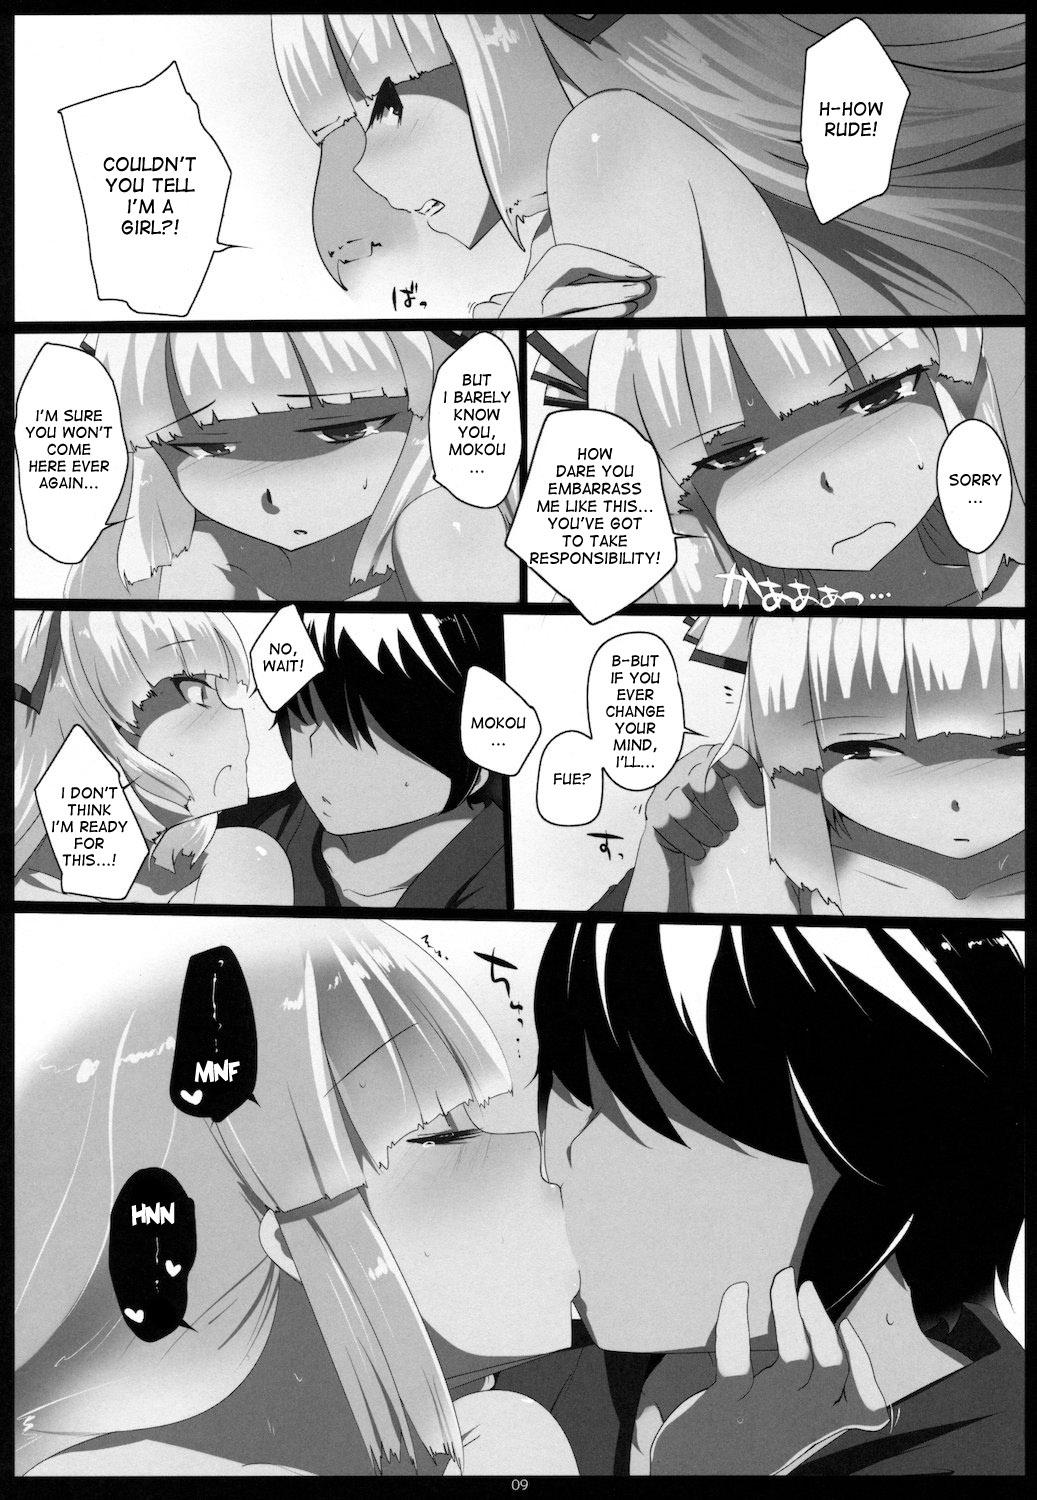 Tamil Touhou Dere Bitch 7 - Touhou project Rough Sex - Page 9